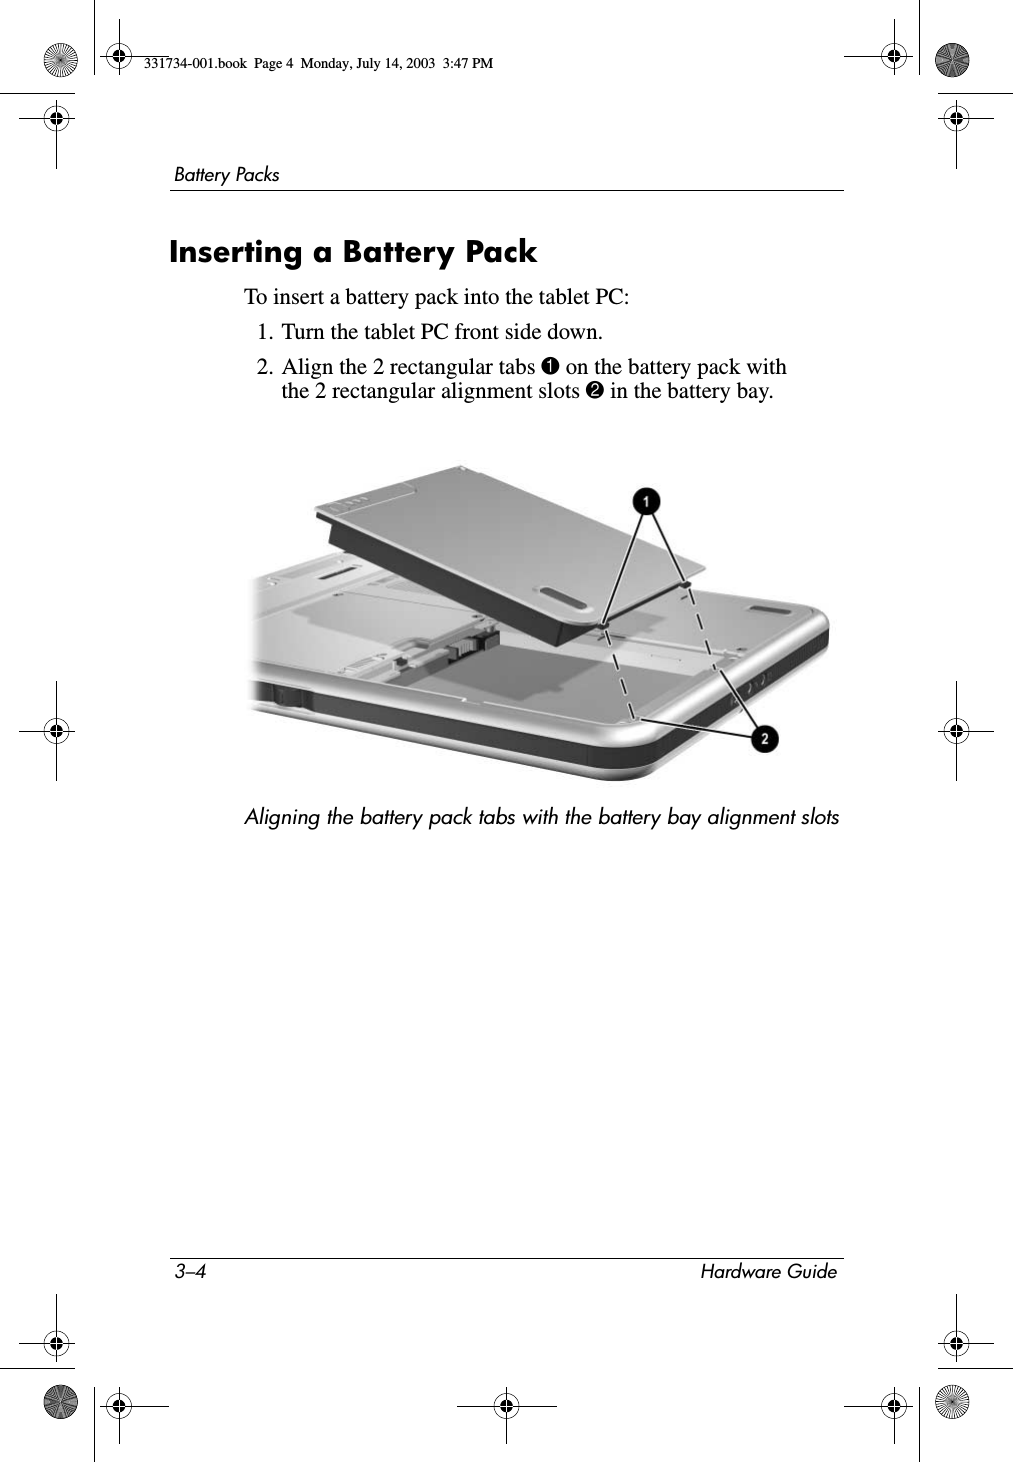 3–4 Hardware GuideBattery PacksInserting a Battery PackTo insert a battery pack into the tablet PC:1. Turn the tablet PC front side down.2. Align the 2 rectangular tabs 1 on the battery pack with the 2 rectangular alignment slots 2 in the battery bay.Aligning the battery pack tabs with the battery bay alignment slots331734-001.book  Page 4  Monday, July 14, 2003  3:47 PM